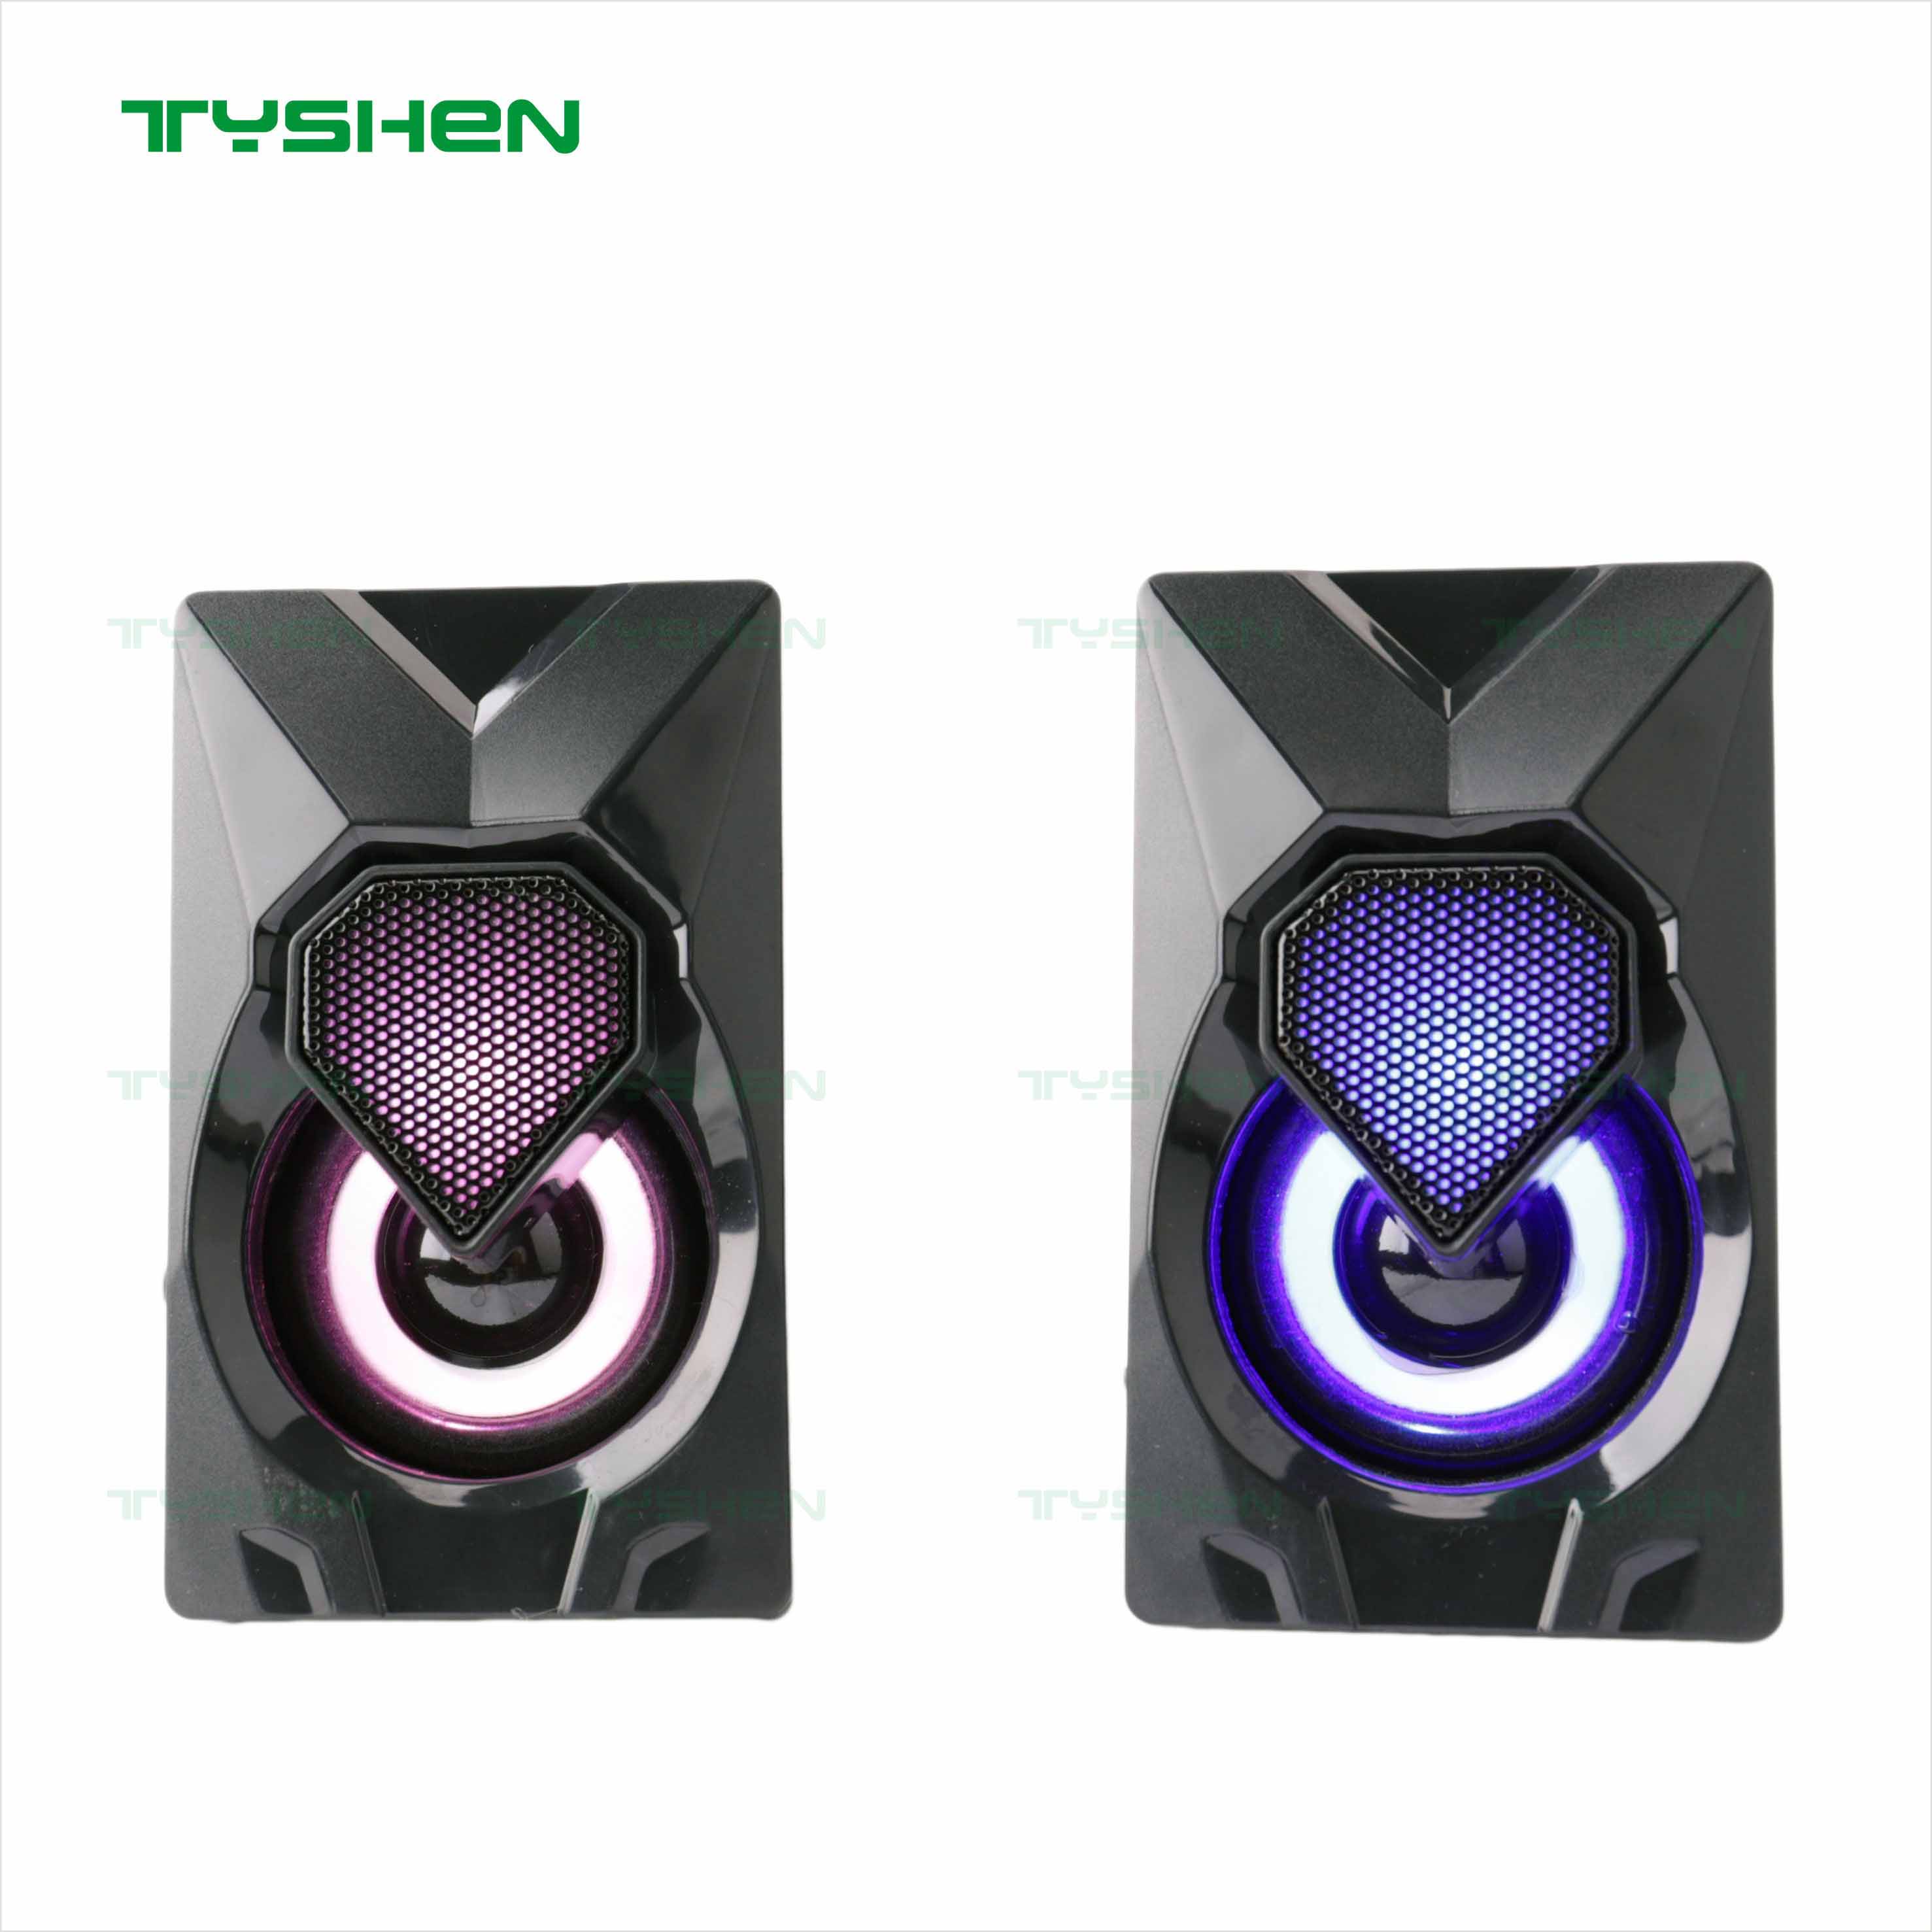 LED RGB Gaming Speaker, 2.0 Channel, Mini Size for Computer, 2021 New Model